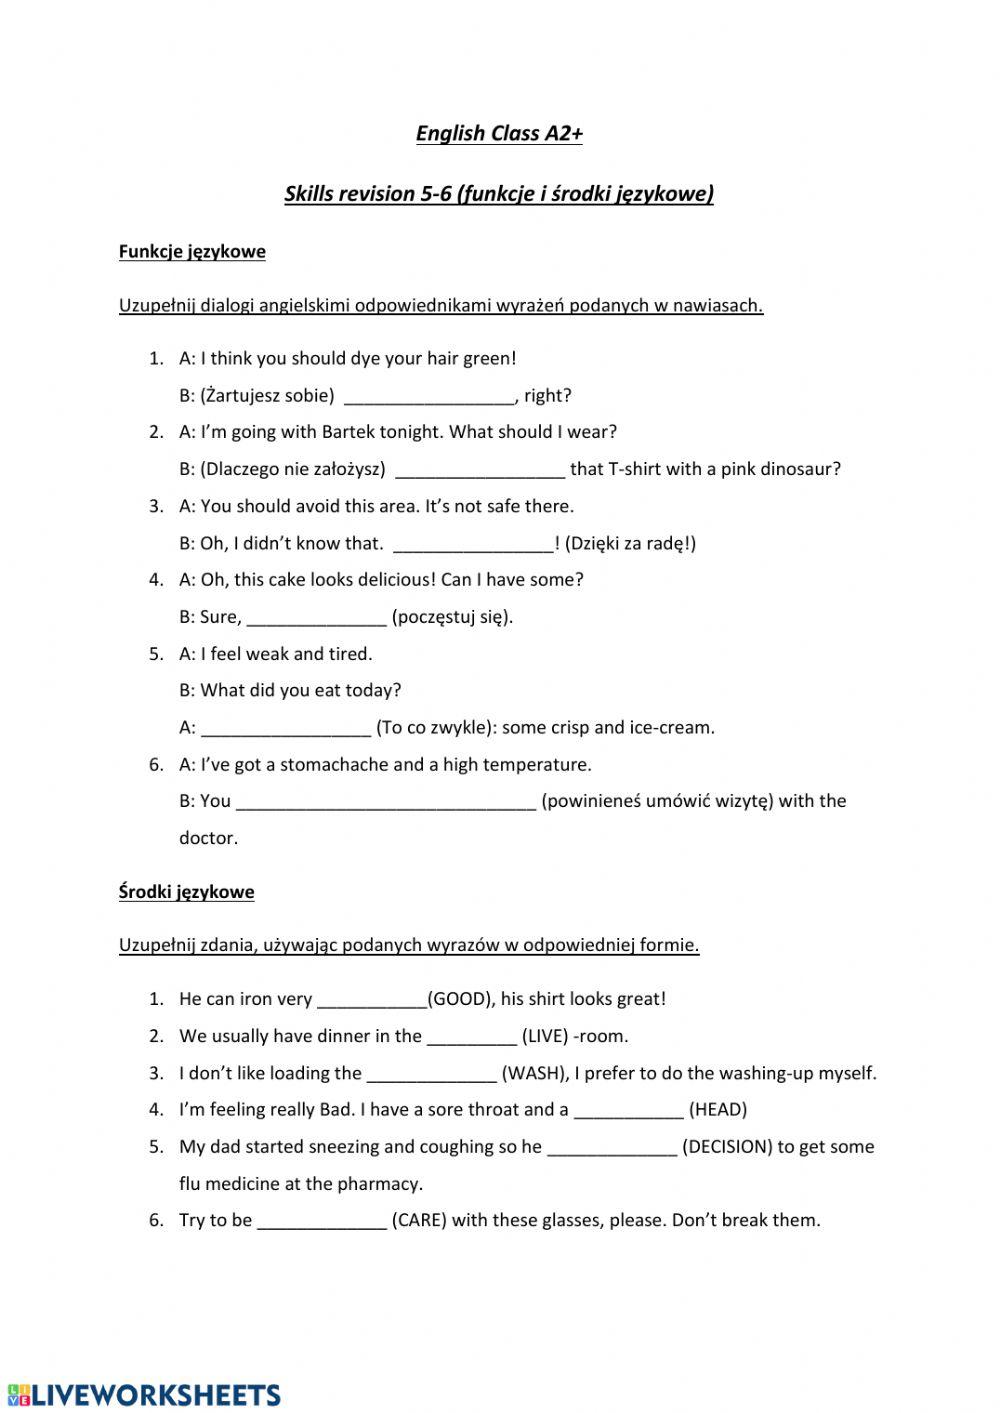 English Class A2+ Skills revision worksheet | Live Worksheets